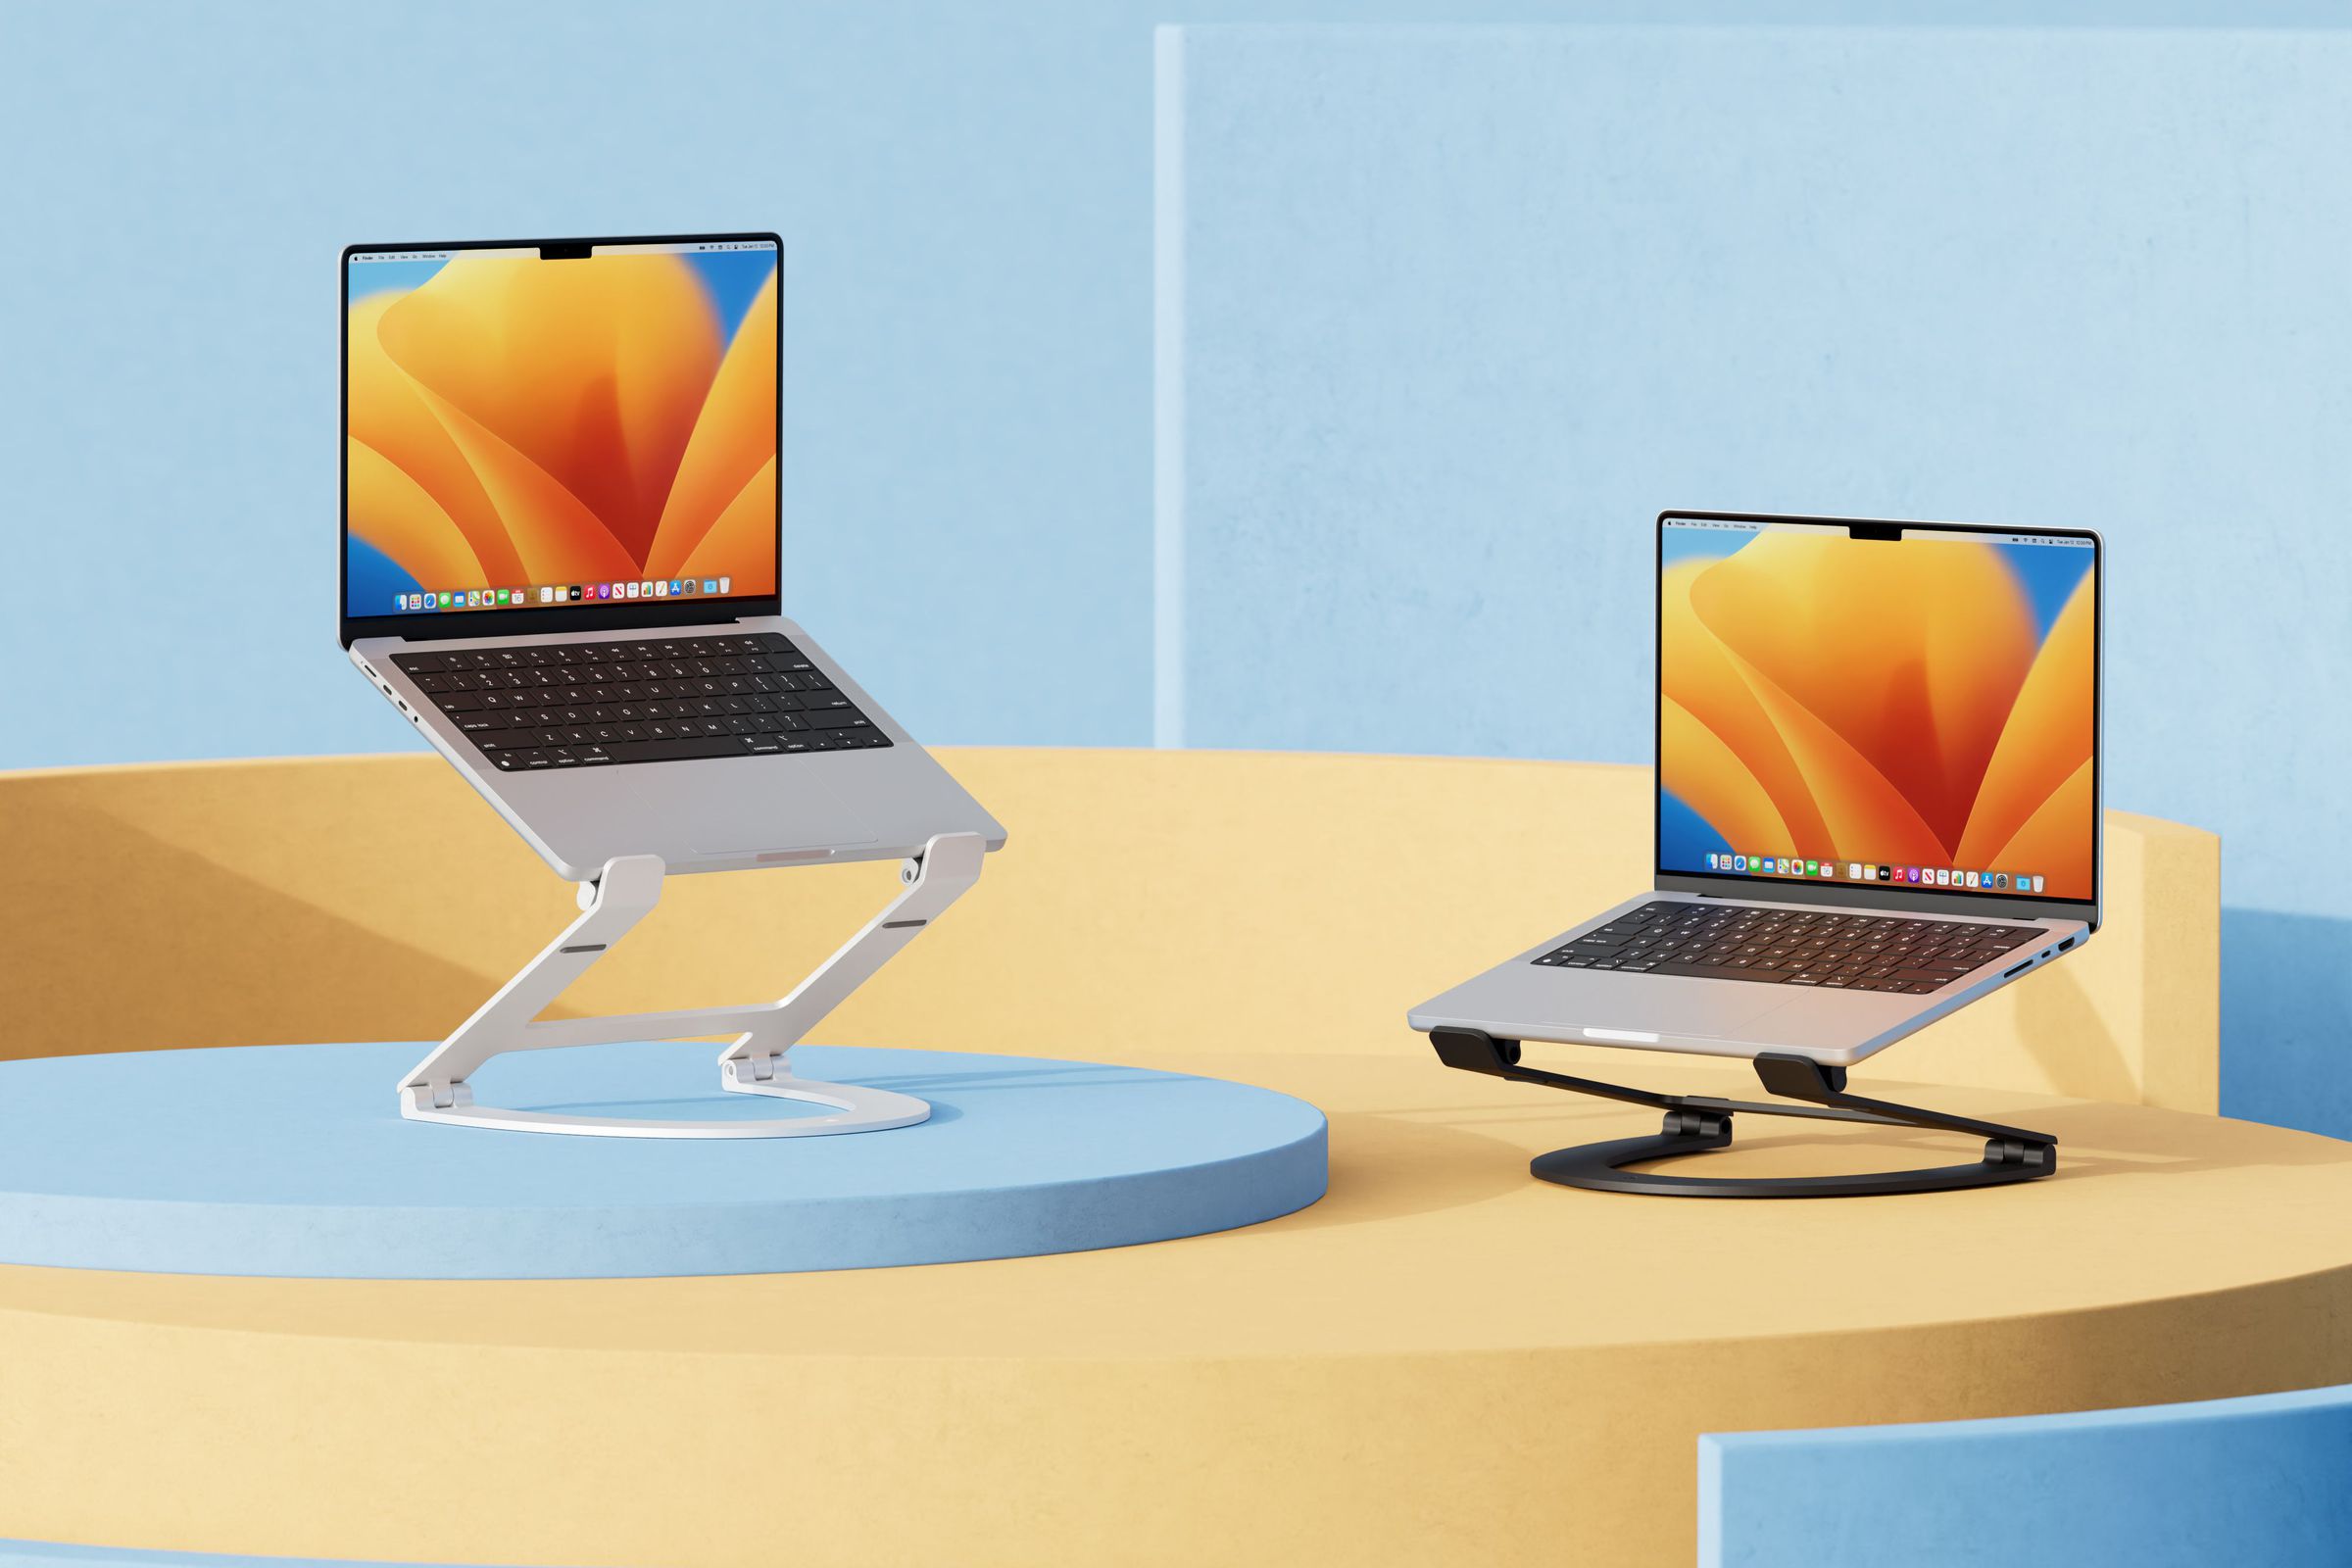 The Twelve South Curve Flex laptop stand in matte white and matte black with two MacBook laptops&nbsp;